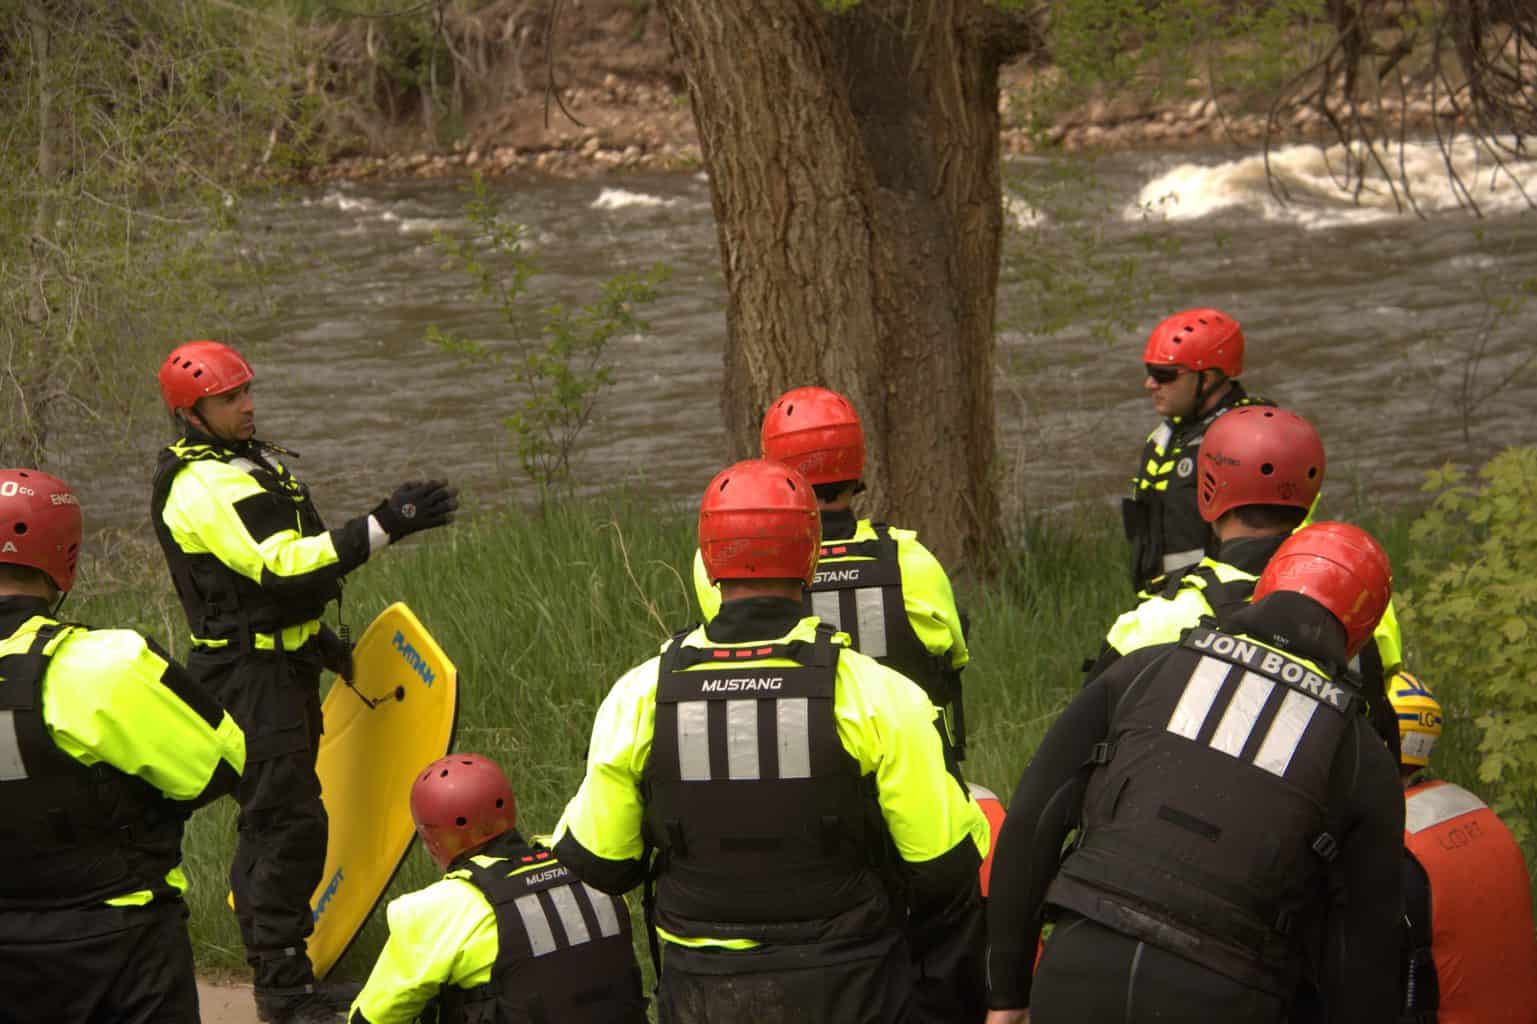 , Swiftwater Rescue Combo followed by Swiftwater Rescue Trainer in Kent, Ohio now open for registration!